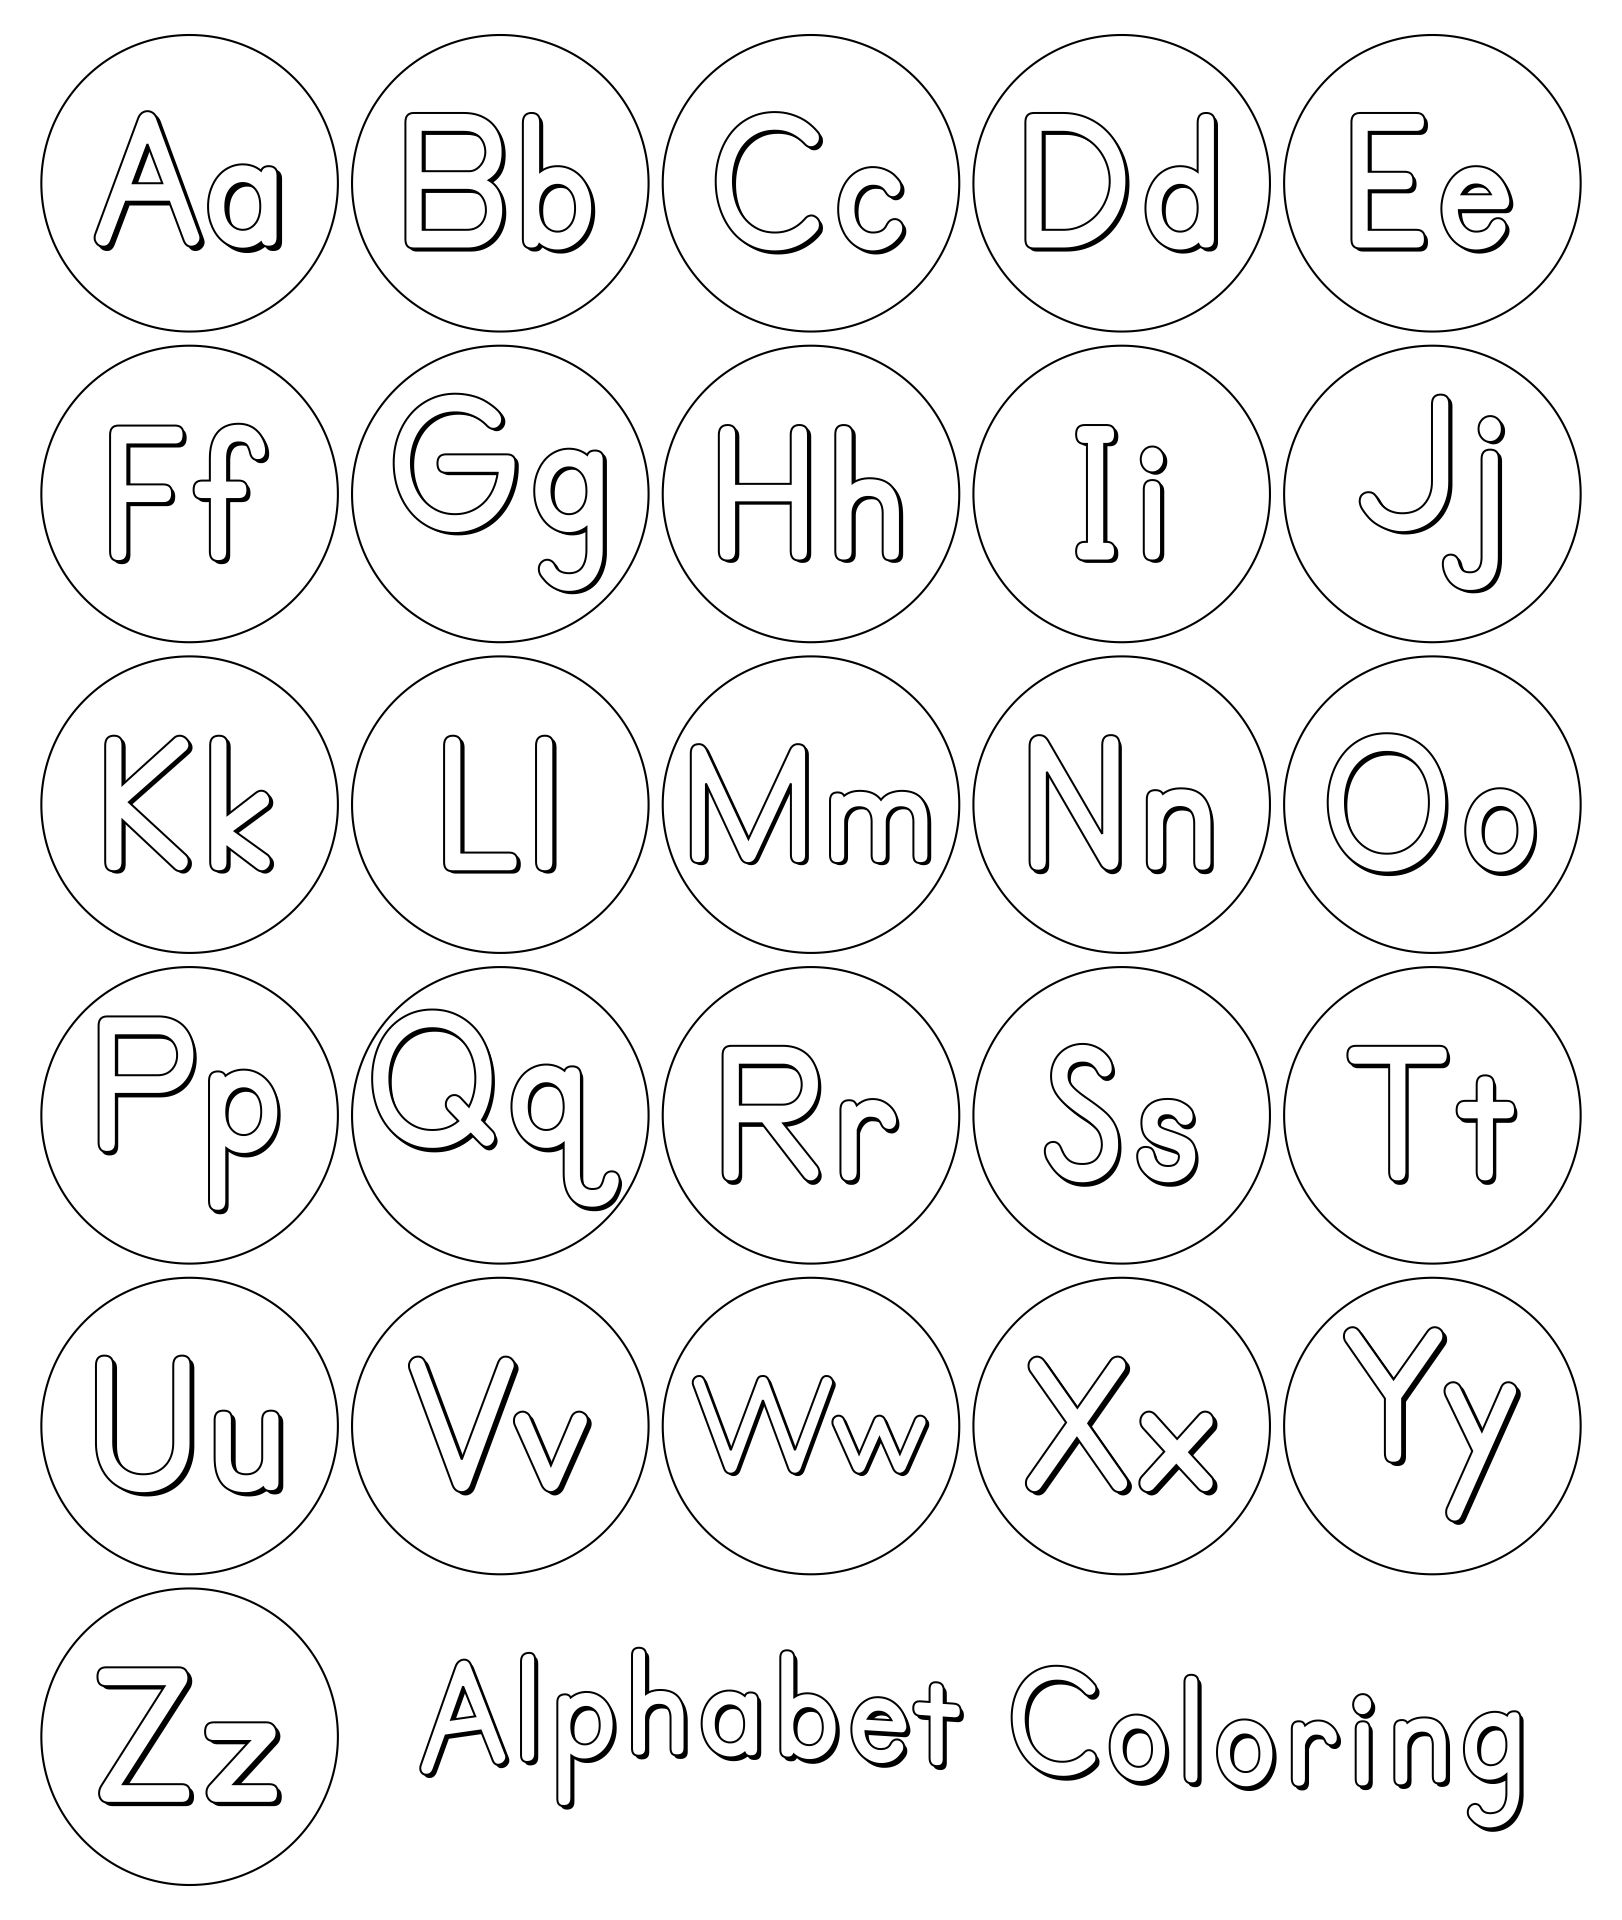 bubble-alphabet-with-uppercase-and-lowercase-letters-coloring-page